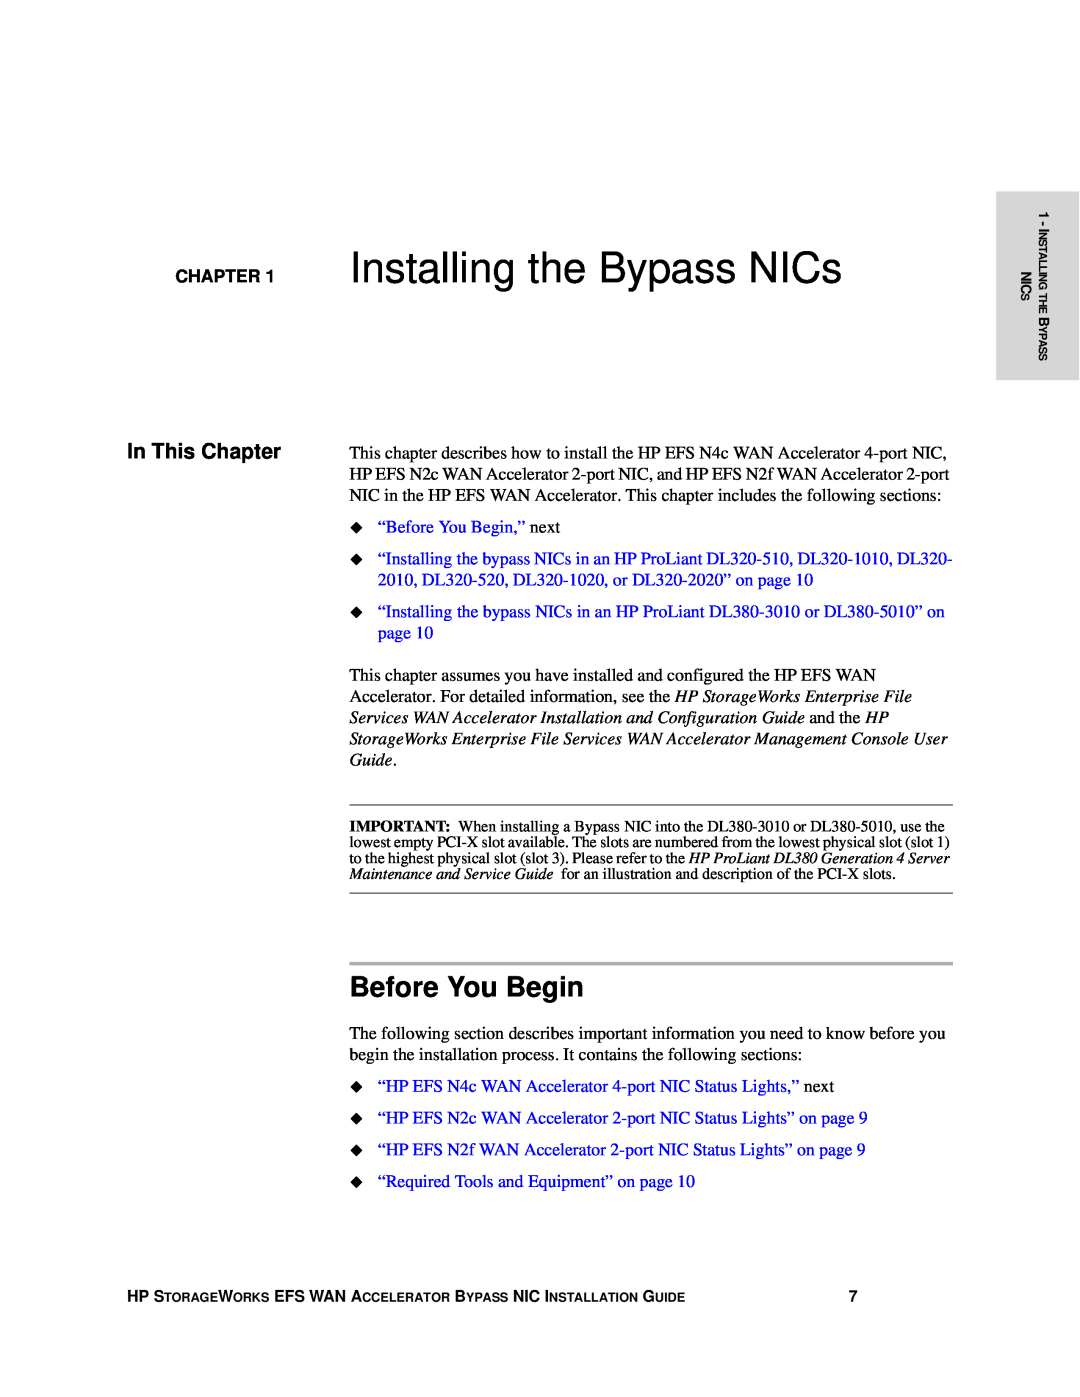 HP Enterprise File Services WAN Accelerator manual Installing the Bypass NICs, Before You Begin, In This Chapter, Guide 